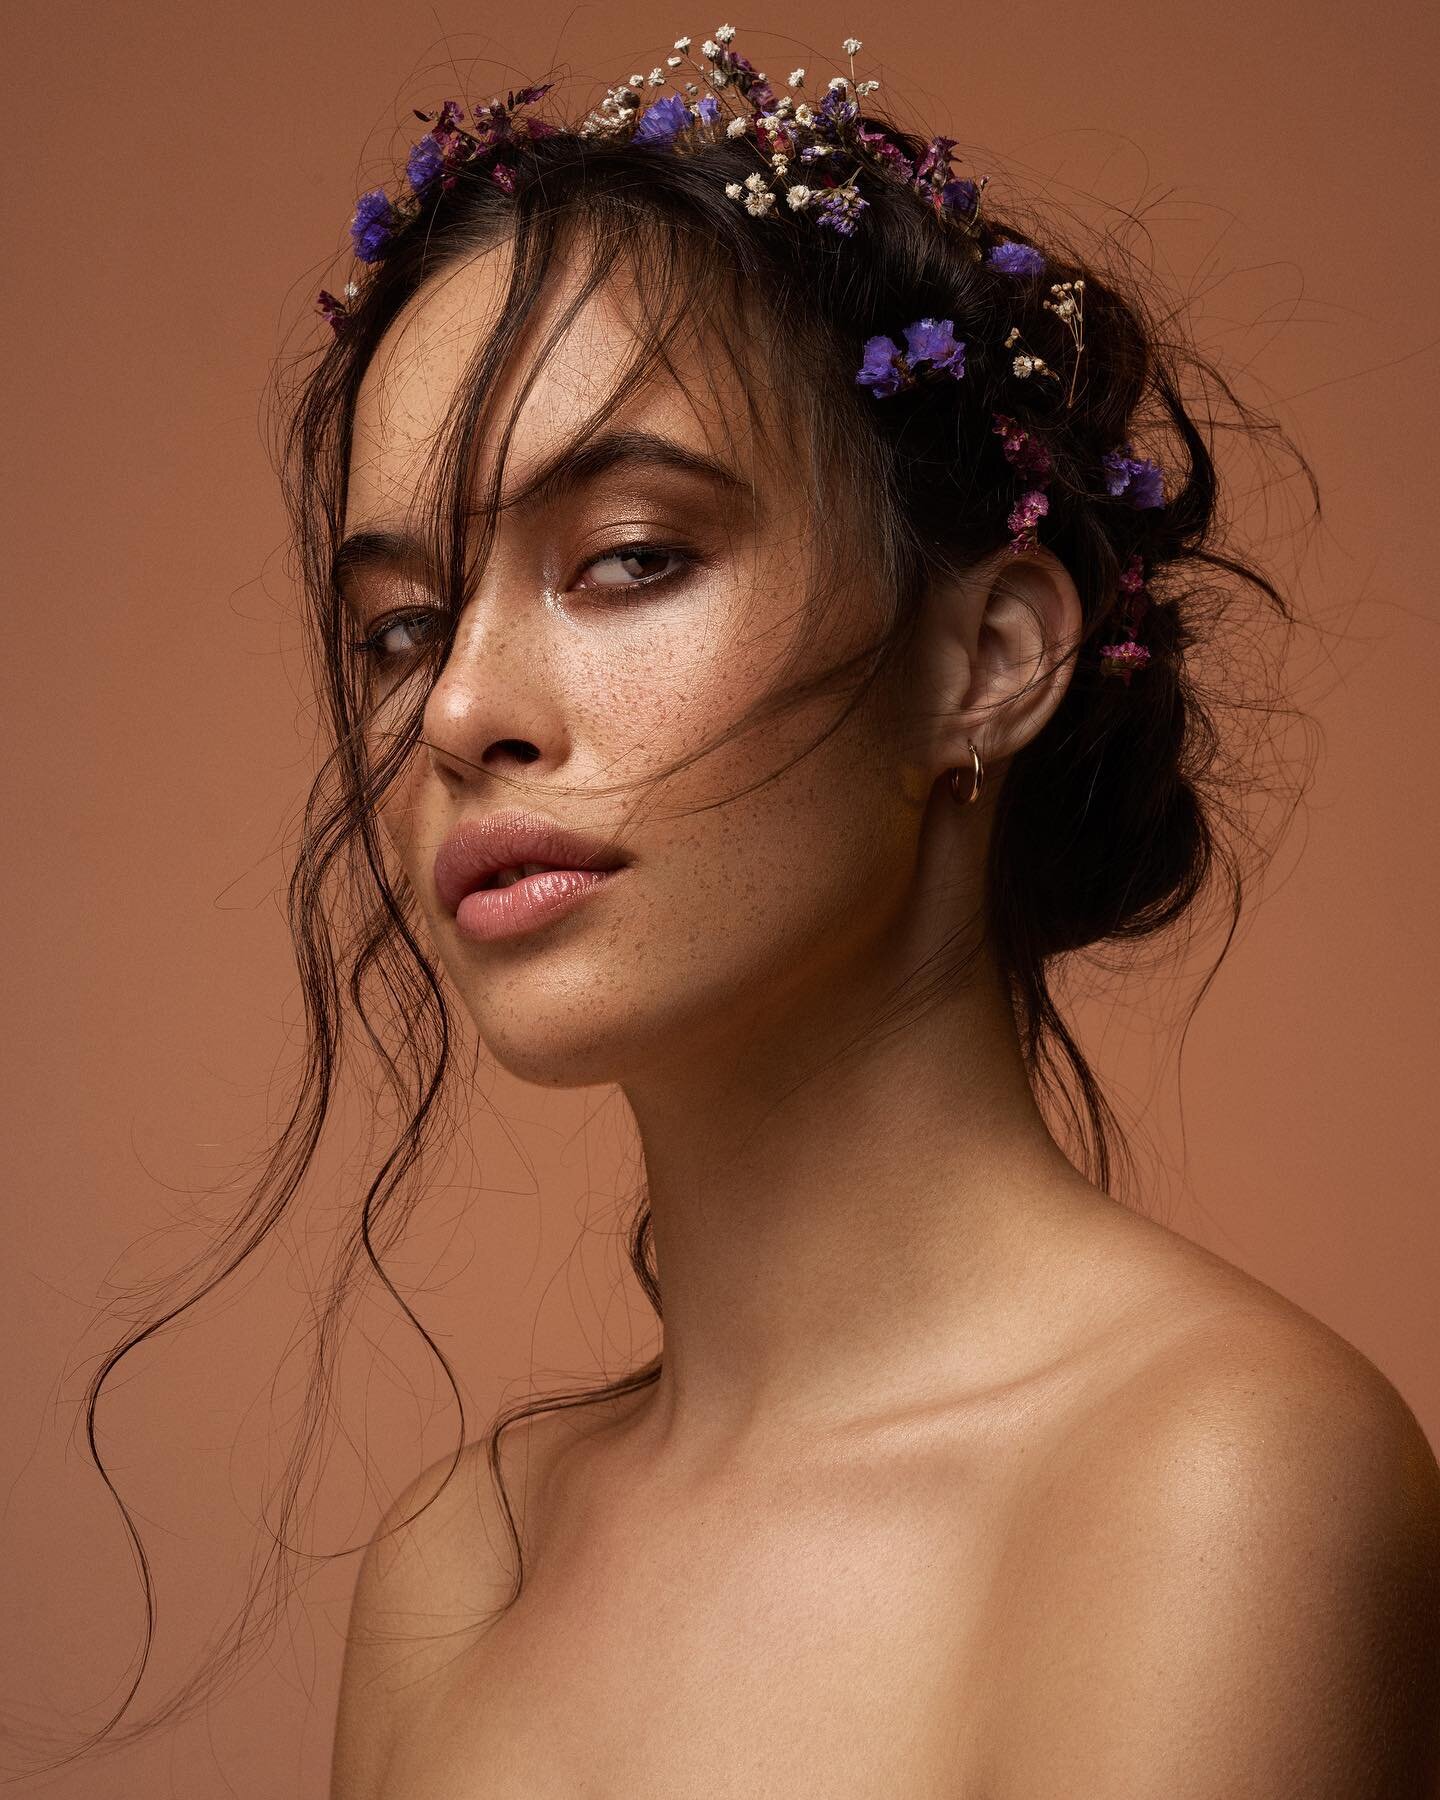 Hair and makeup for the beautiful @charlee628 
Photography by the extremely talented @maeganm 

#queenstownmakeupartist #bronzedmakeup #bohobride #floralart #fauxfreckles #bronze #neutralshades #nzmakeupartist #editorialmakeup #beautyphotography